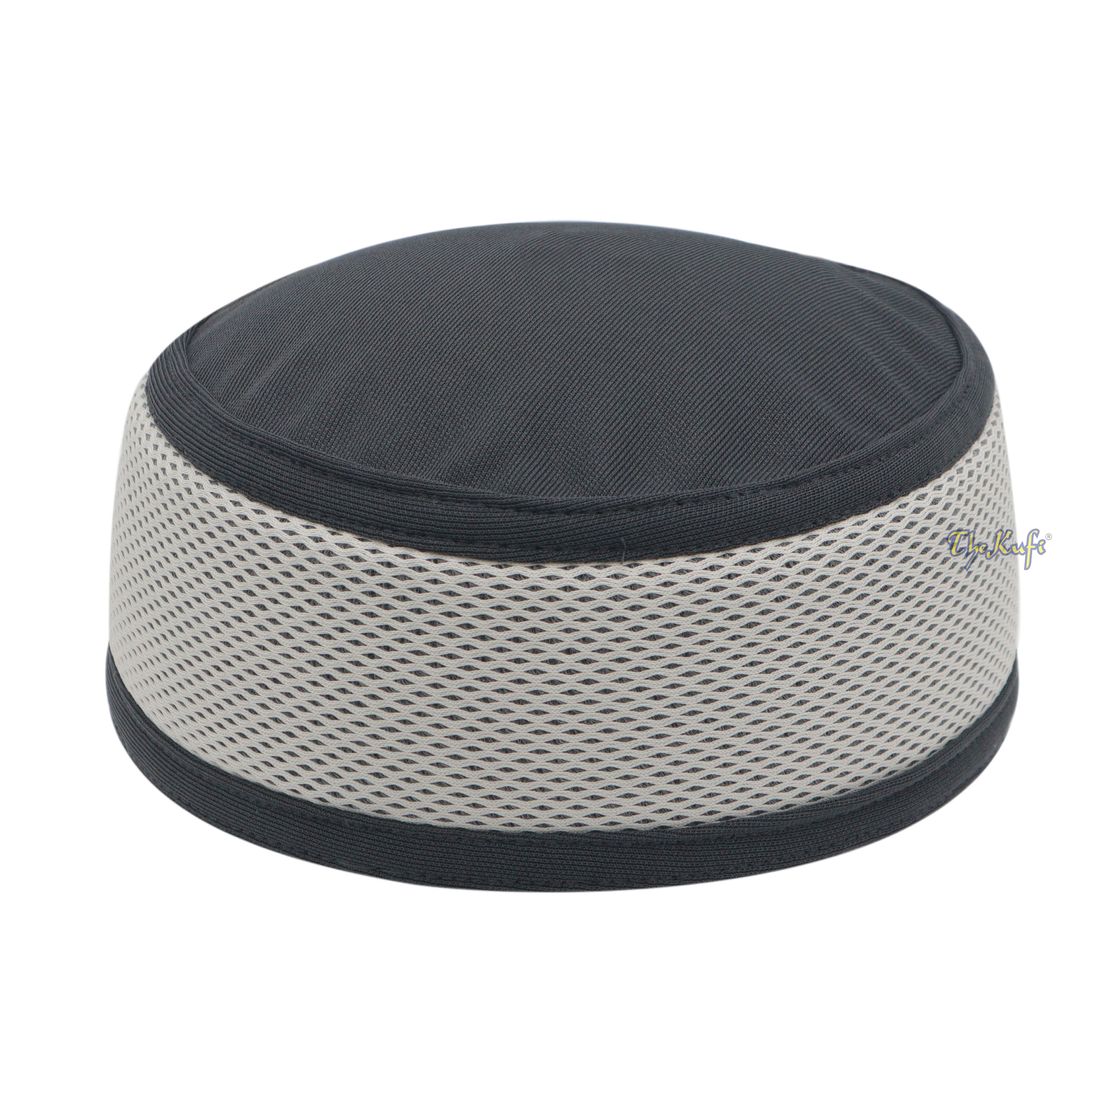 Dark Grey and Off White Madun Vented Top Pliable Two-color Round Kufi Hat